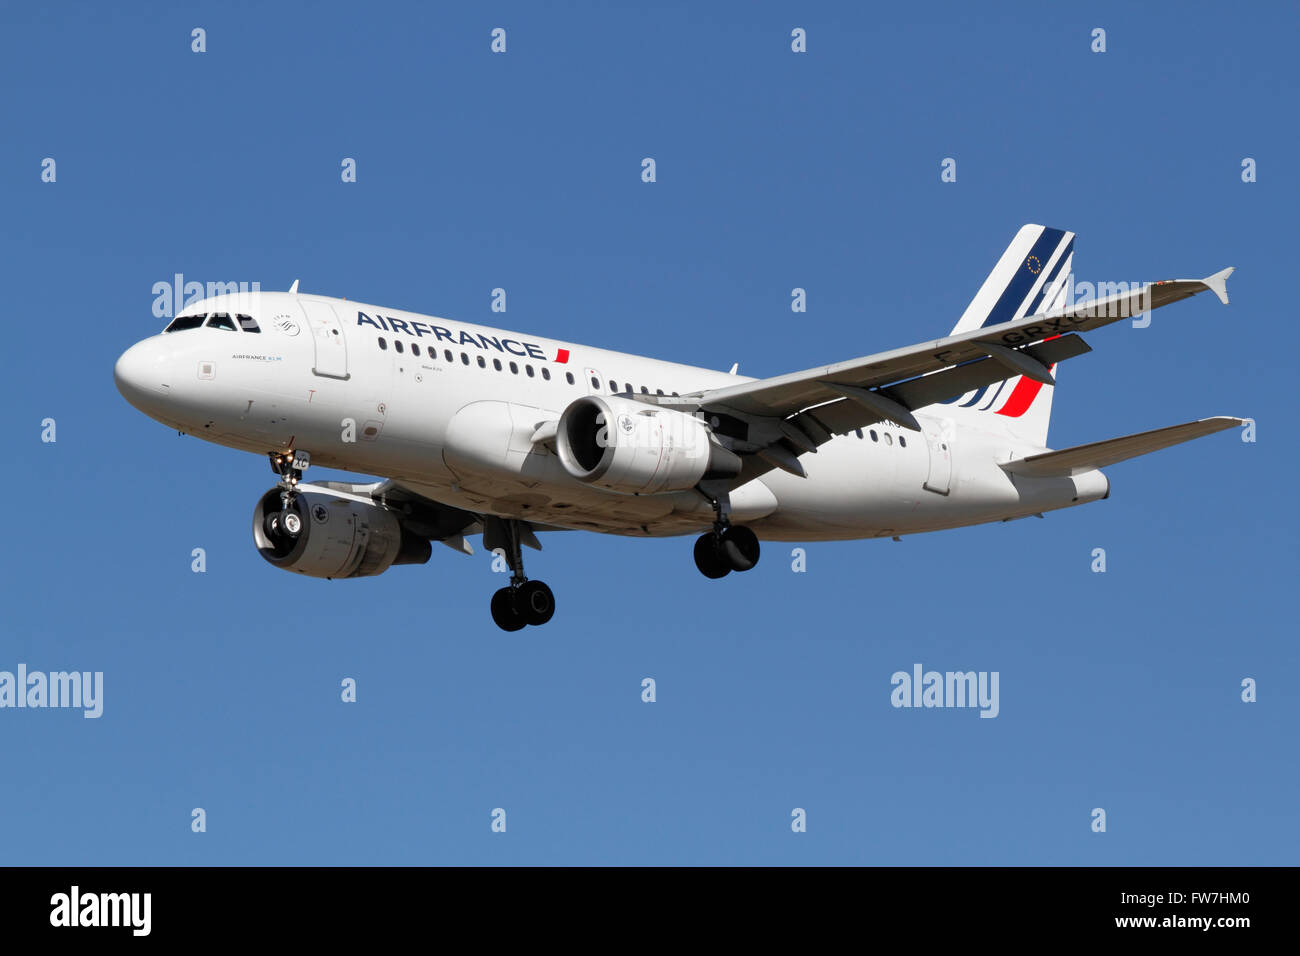 AIRFRANCE, Airbus A319, F-GRXC, flight AF1150 from Paris on final approach to Kastrup Airport, CPH, Copenhagen, Denmark Stock Photo